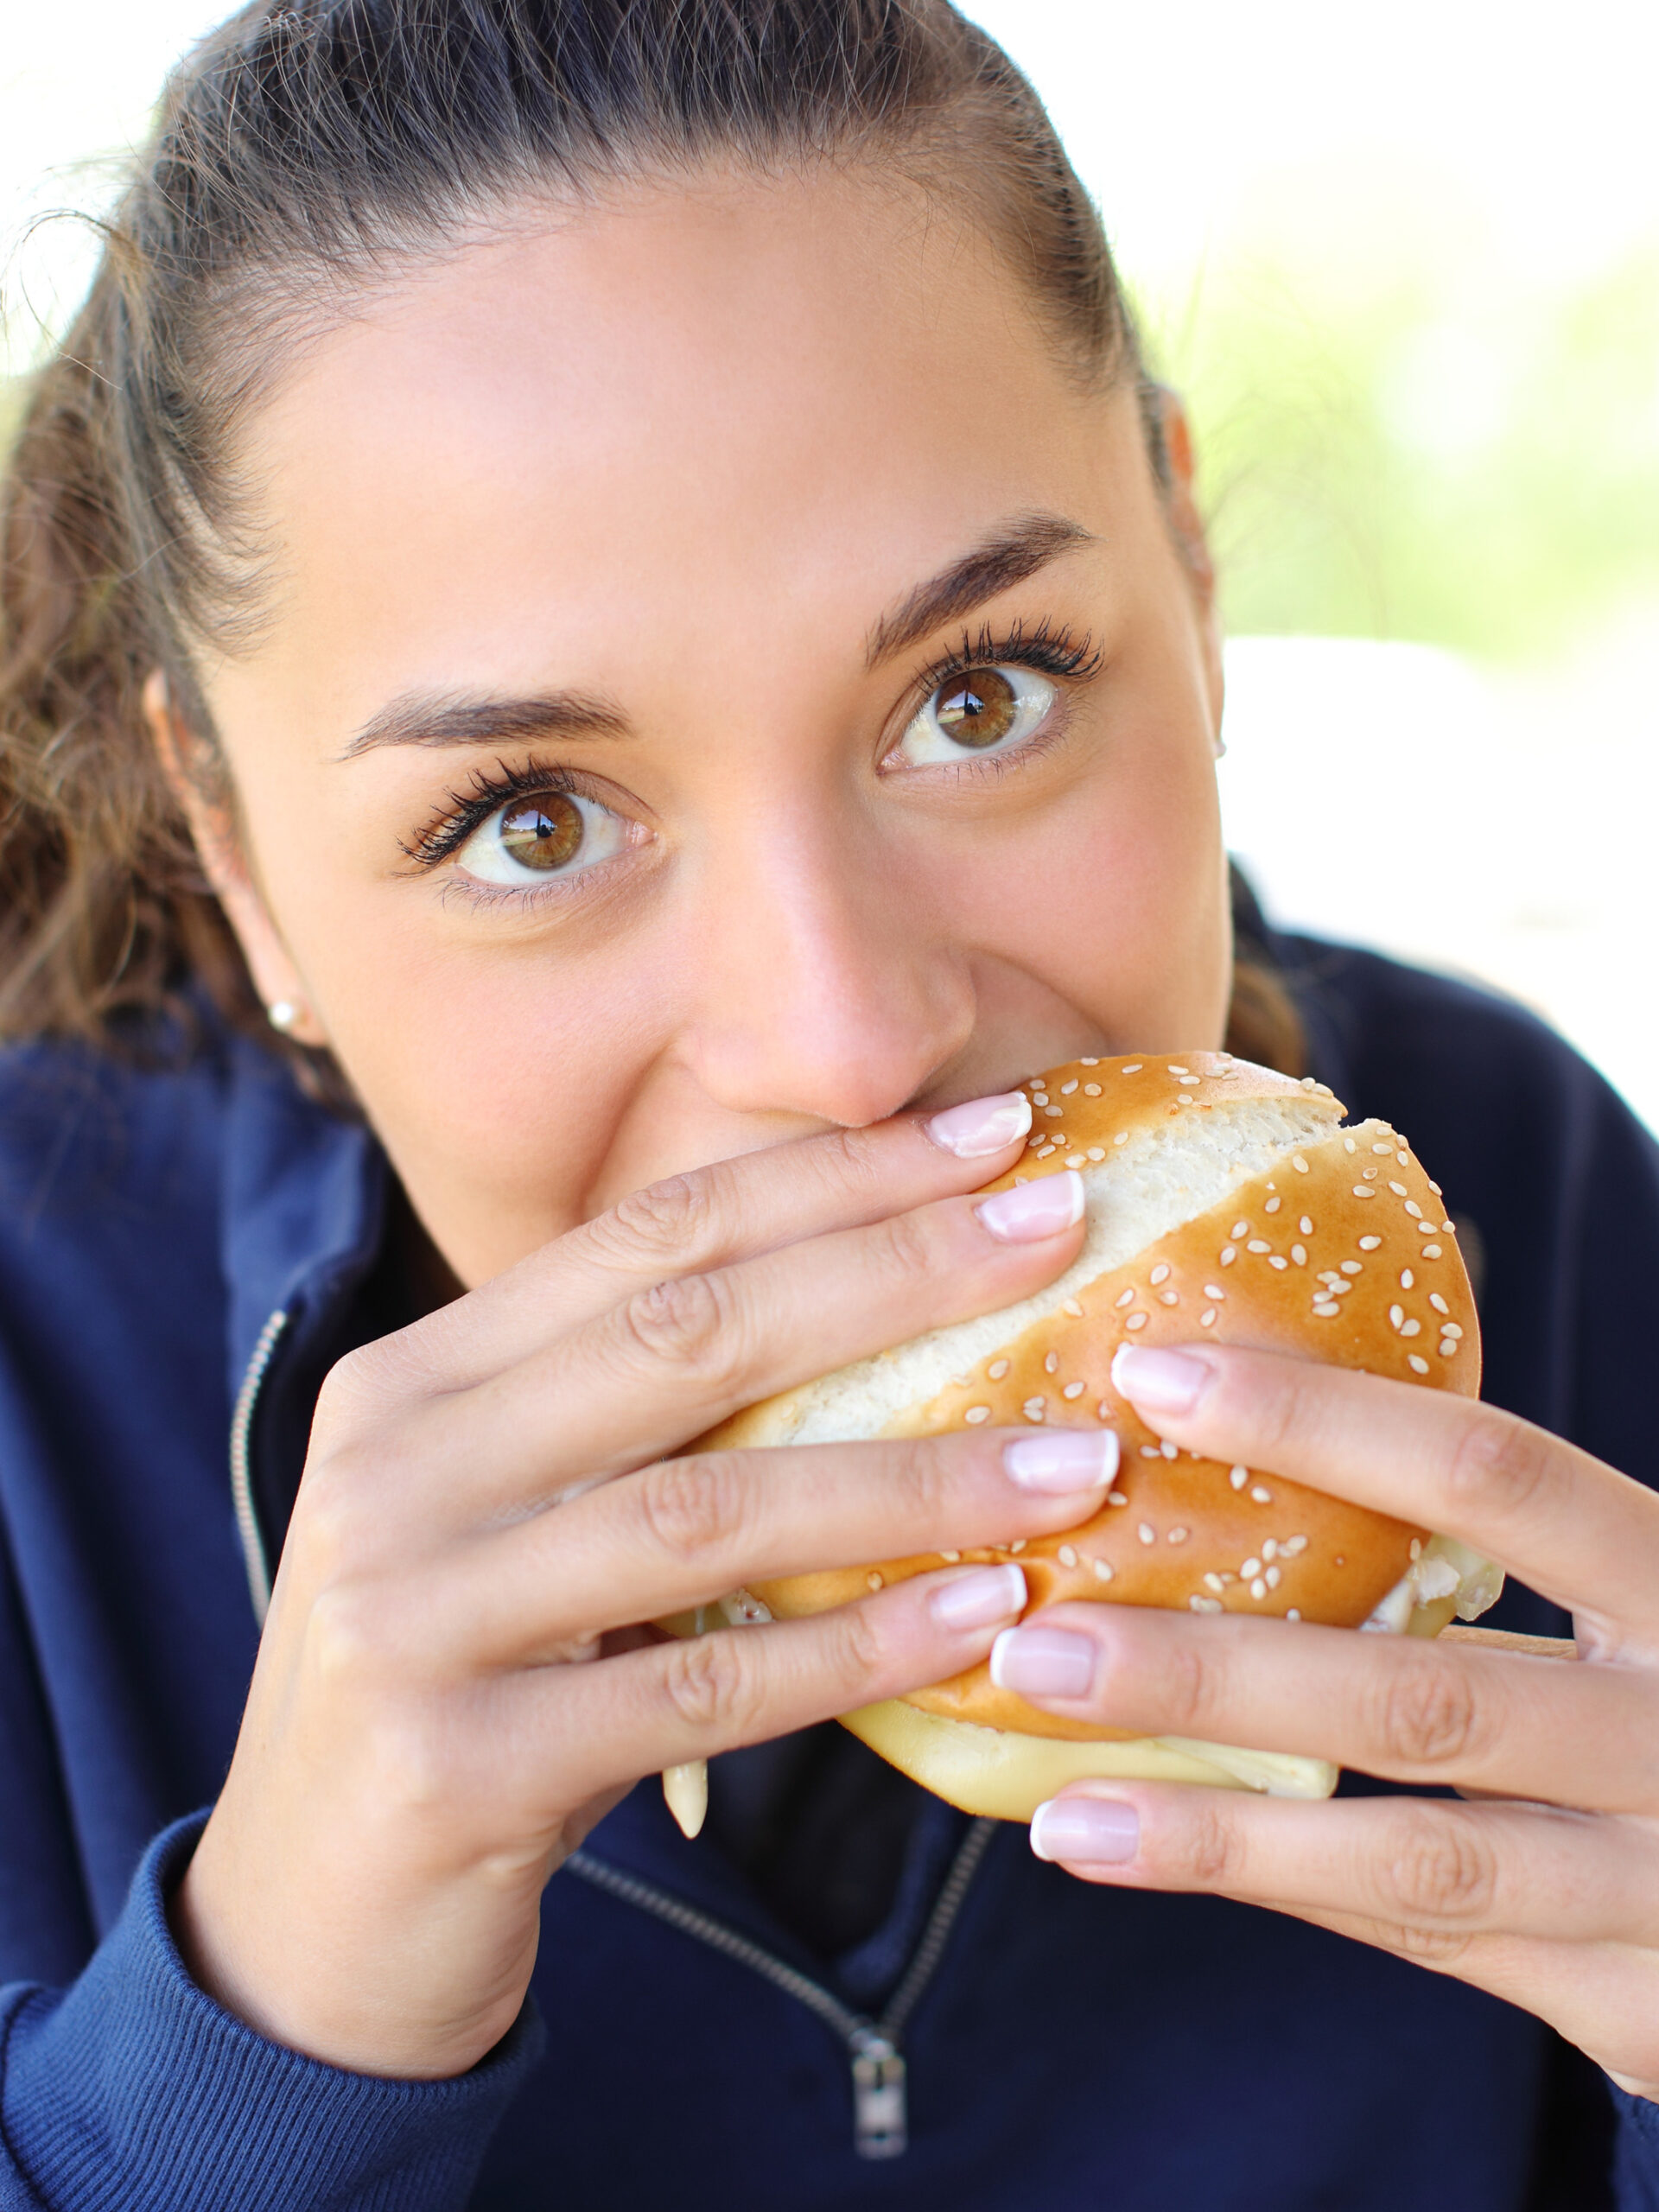 Teen takes bite from burger - detecting harmful diet trends for kids and teens